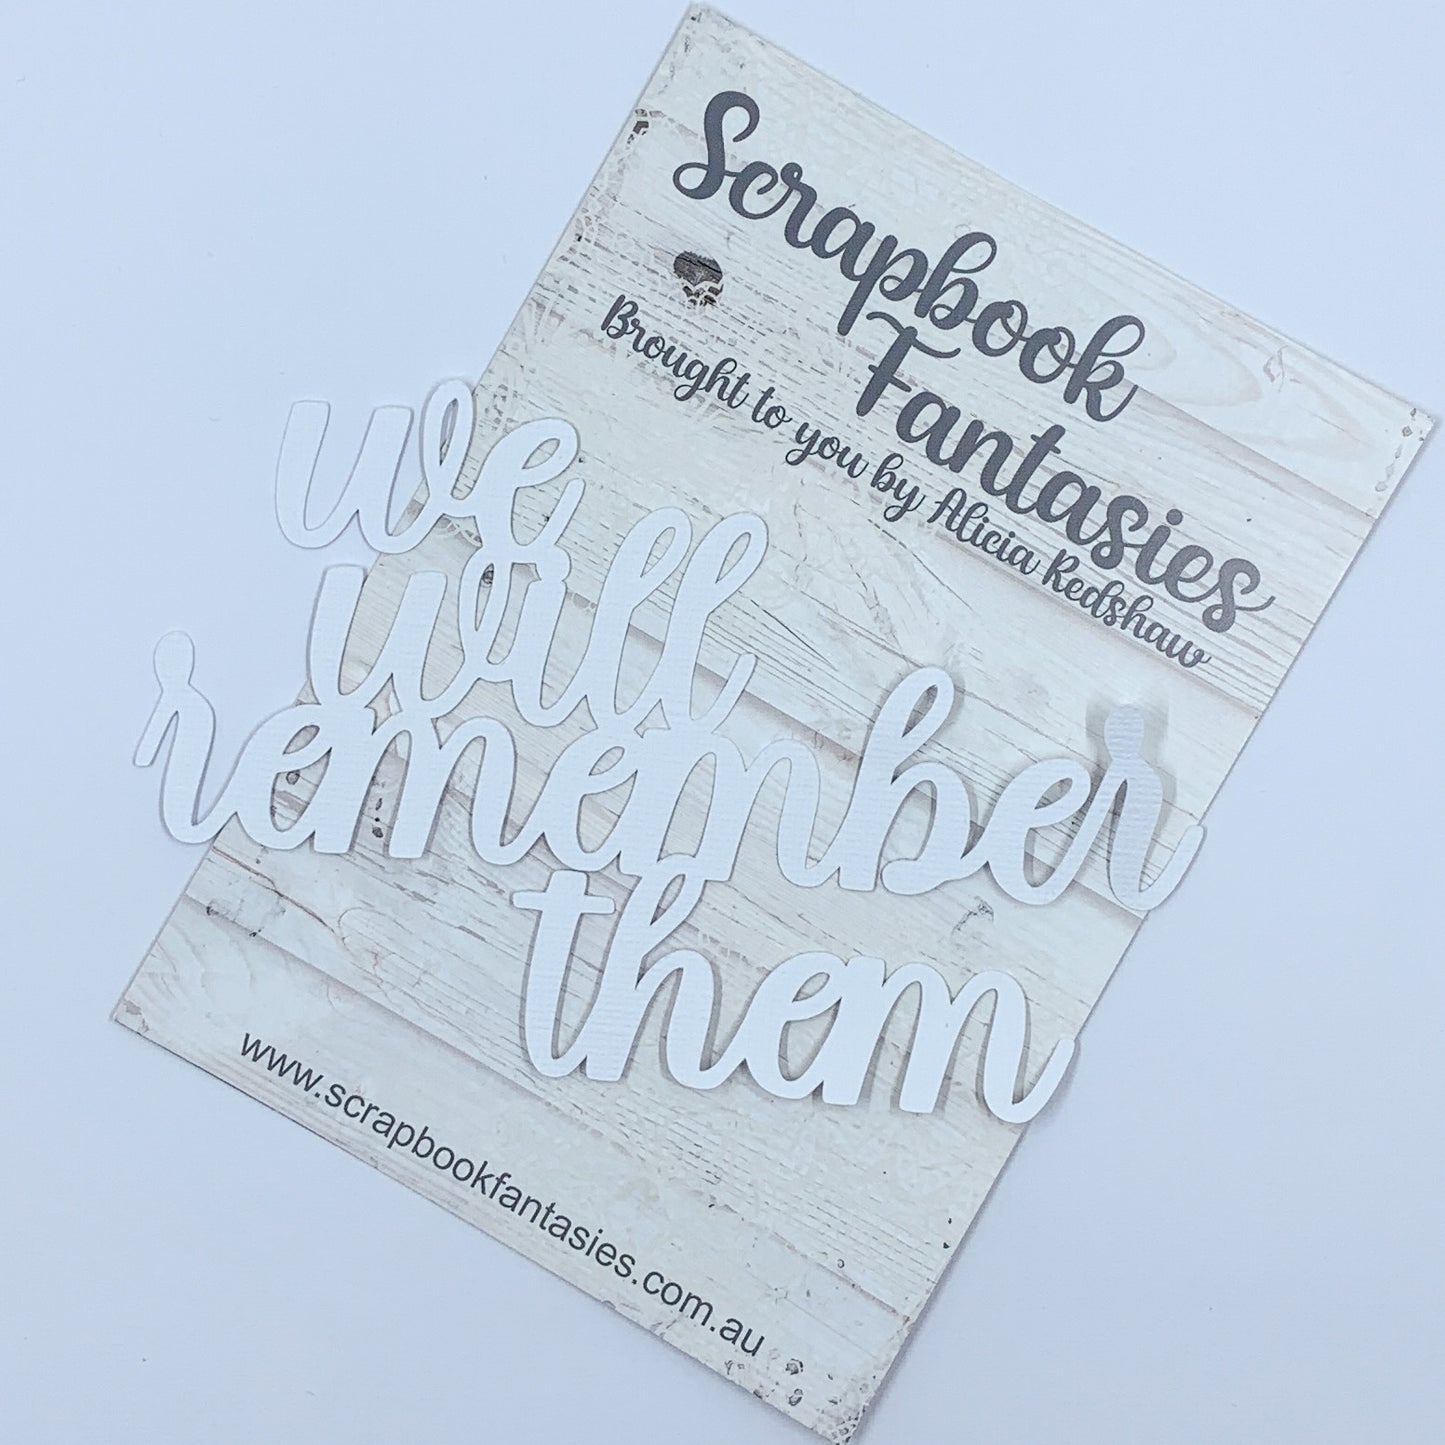 We will remember them 5.75"x3.75" White Linen Cardstock Title-Cut - Designed by Alicia Redshaw